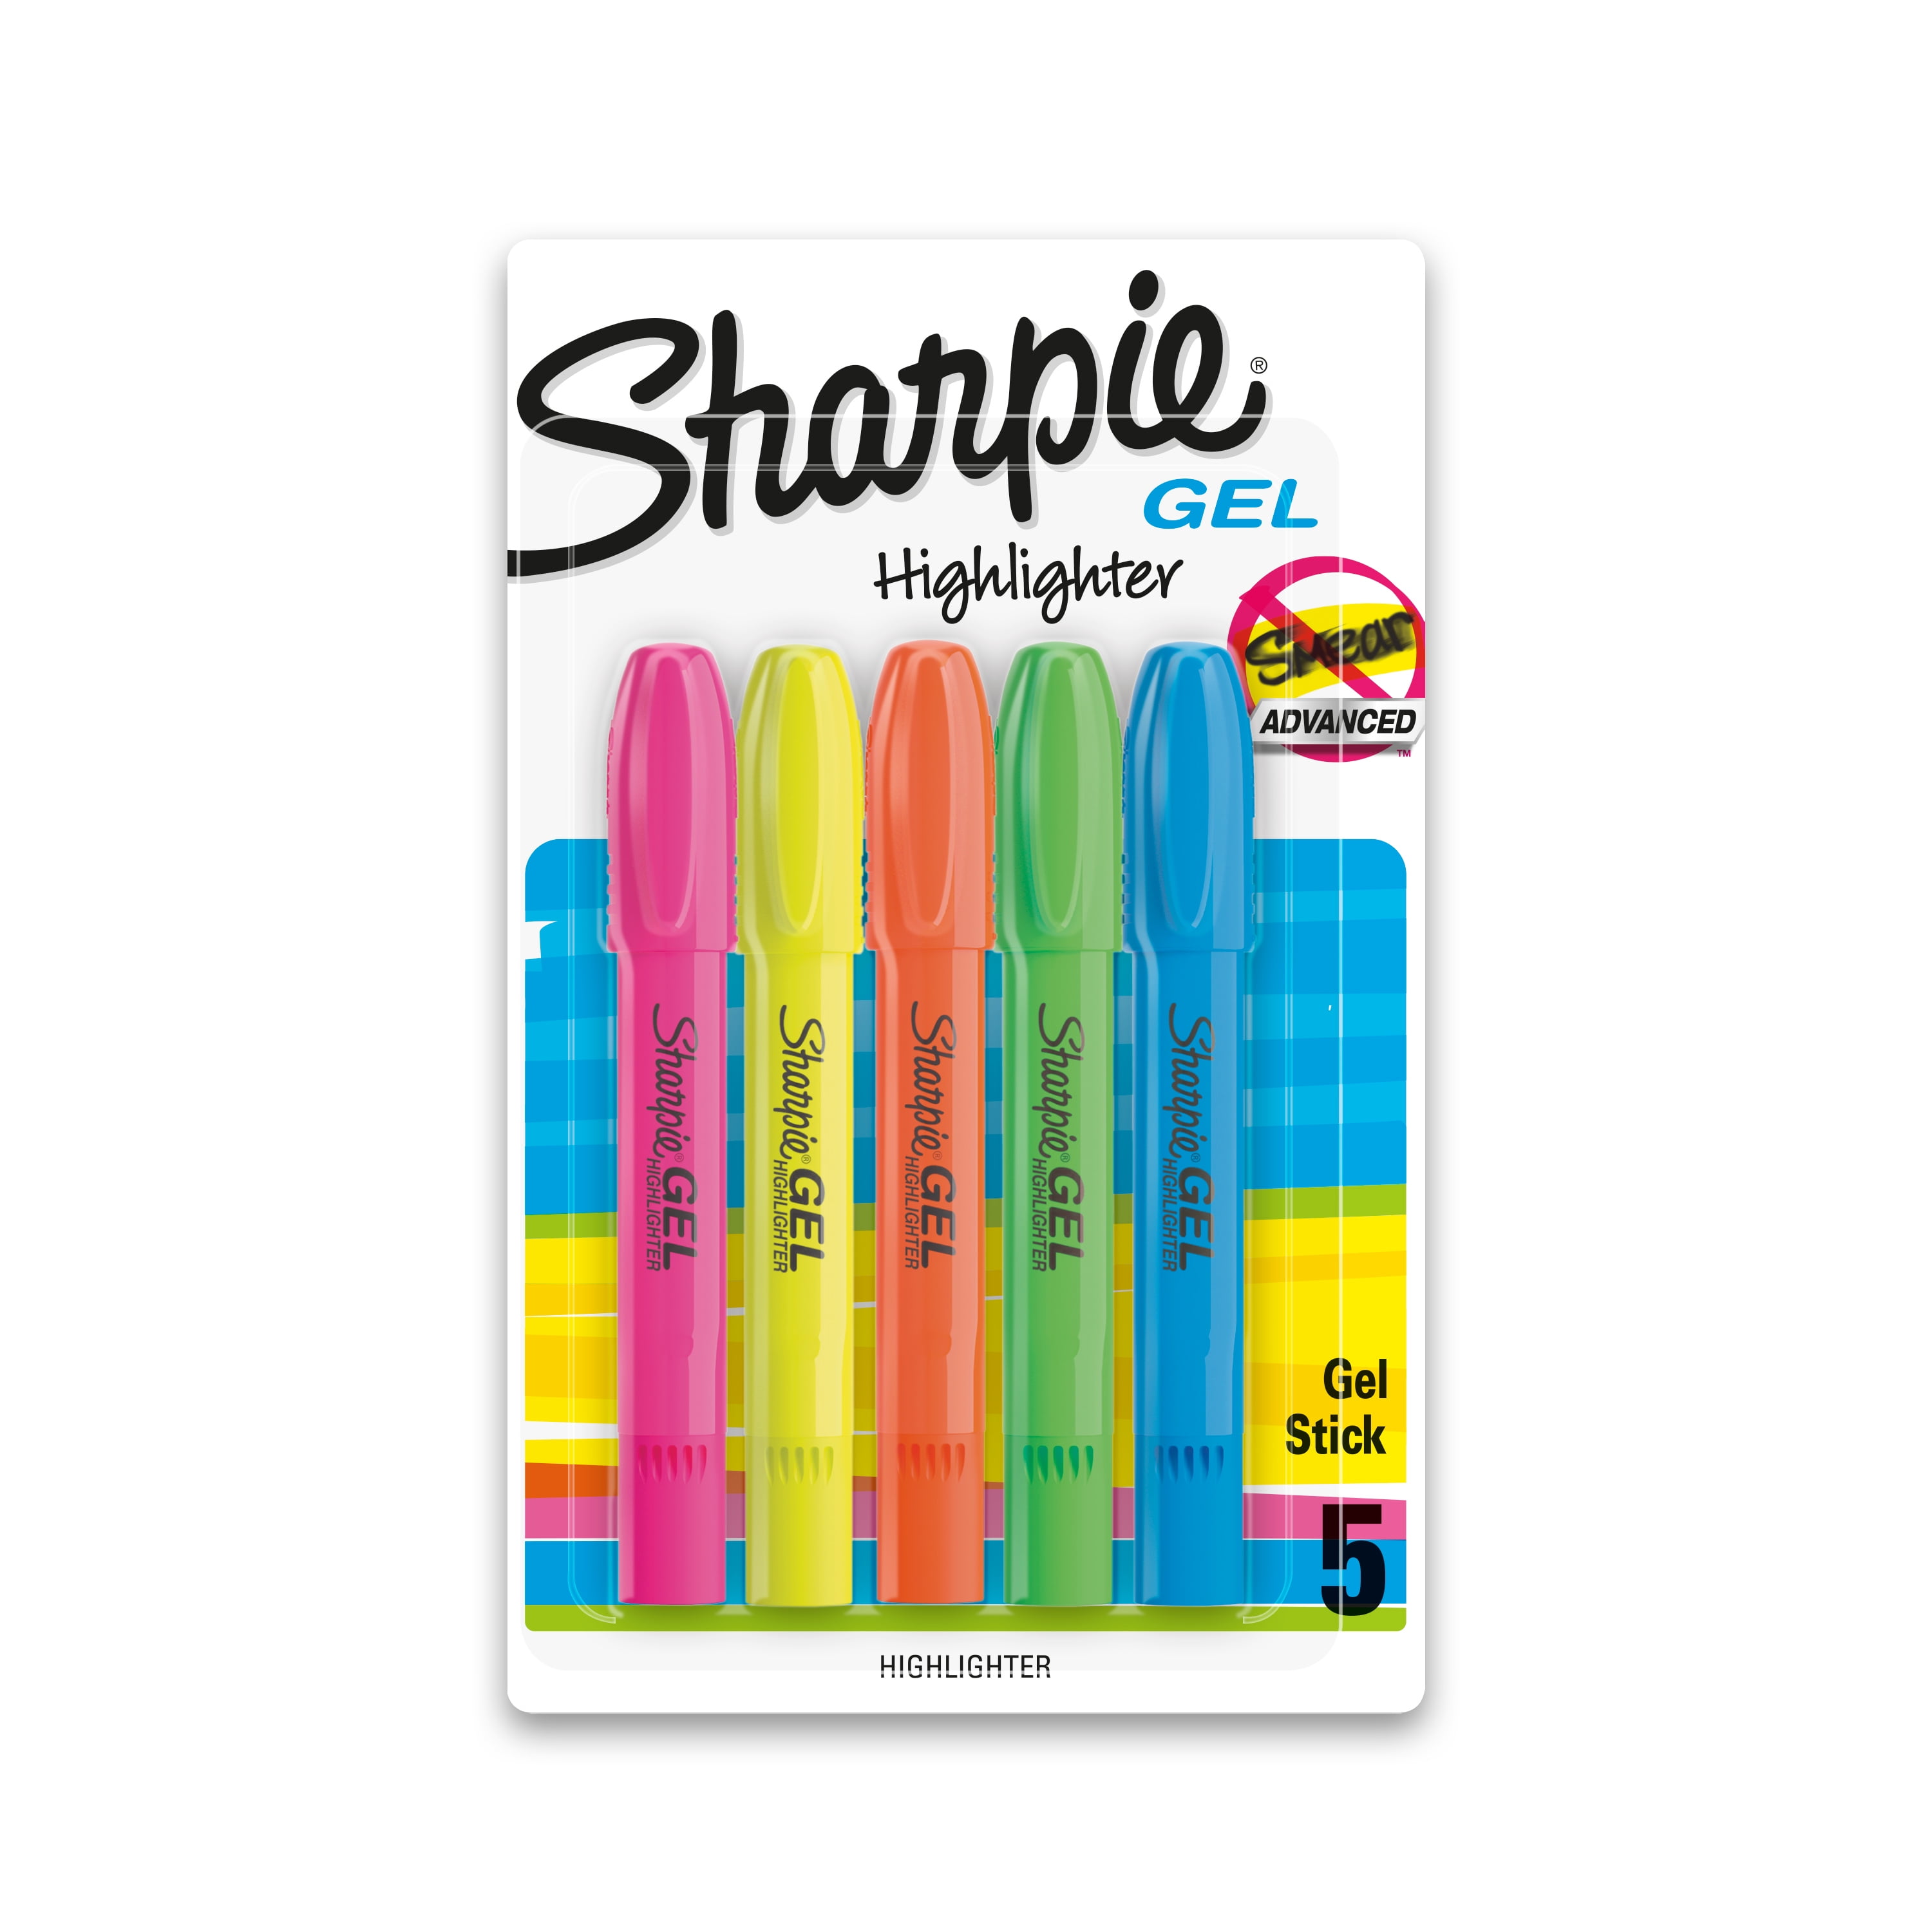 Sharpie - Permanent Marker, Fine, Assorted Colors , 24 Count - Sam's Club